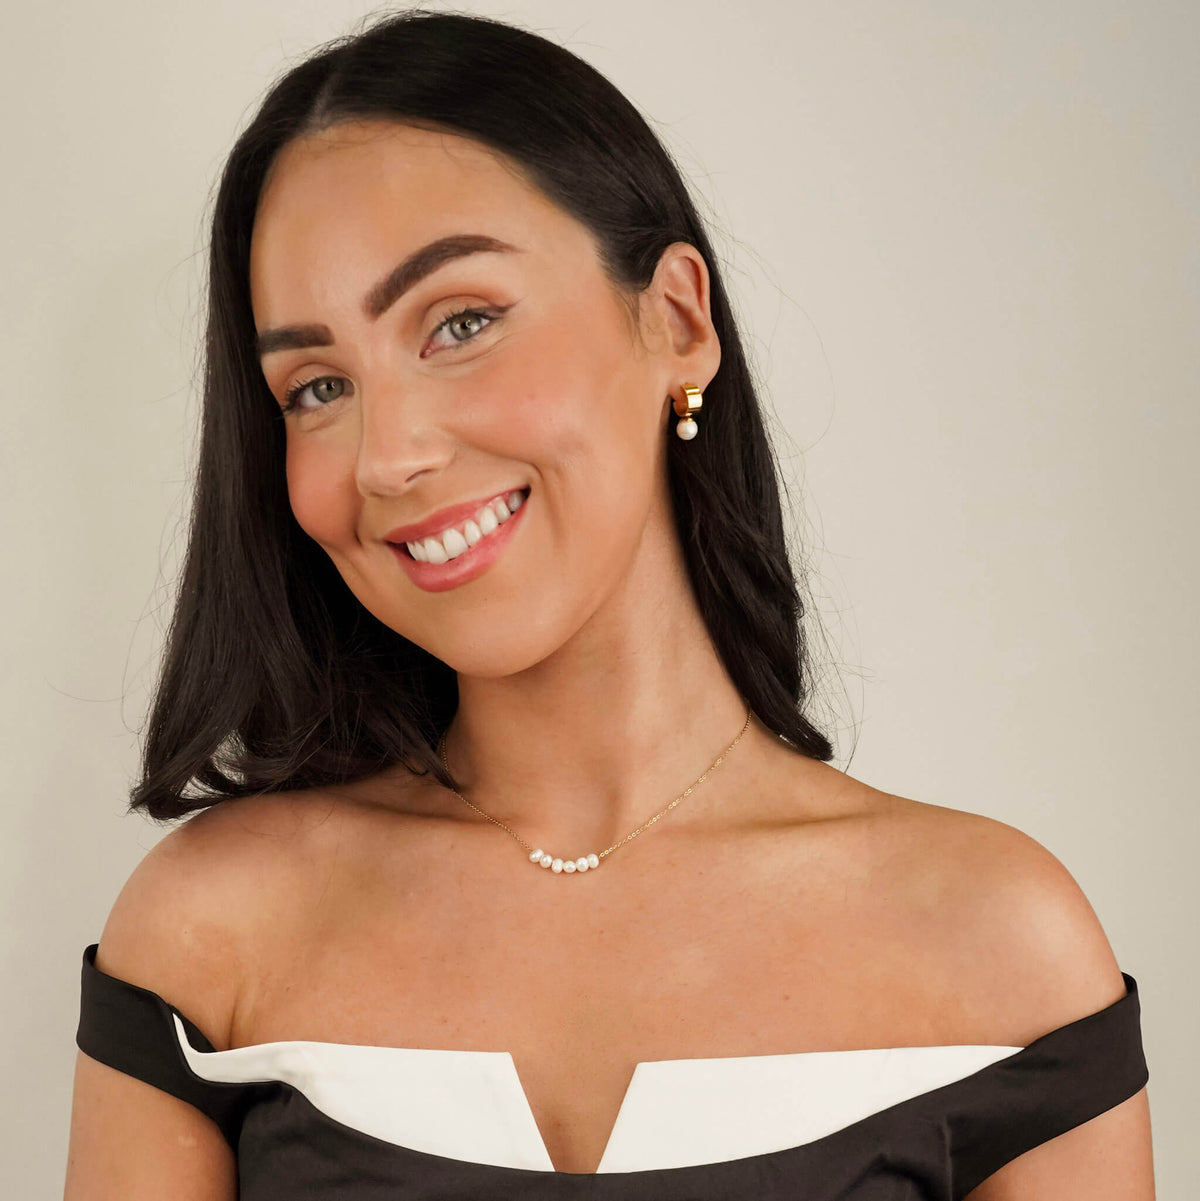 this photo shows a pearl necklace and matching  pearl earrings worn by a model. The pearls are bright and eye catching. The necklace has an elegant gold chain and the 6 freshwater pearls can move freely along it. 